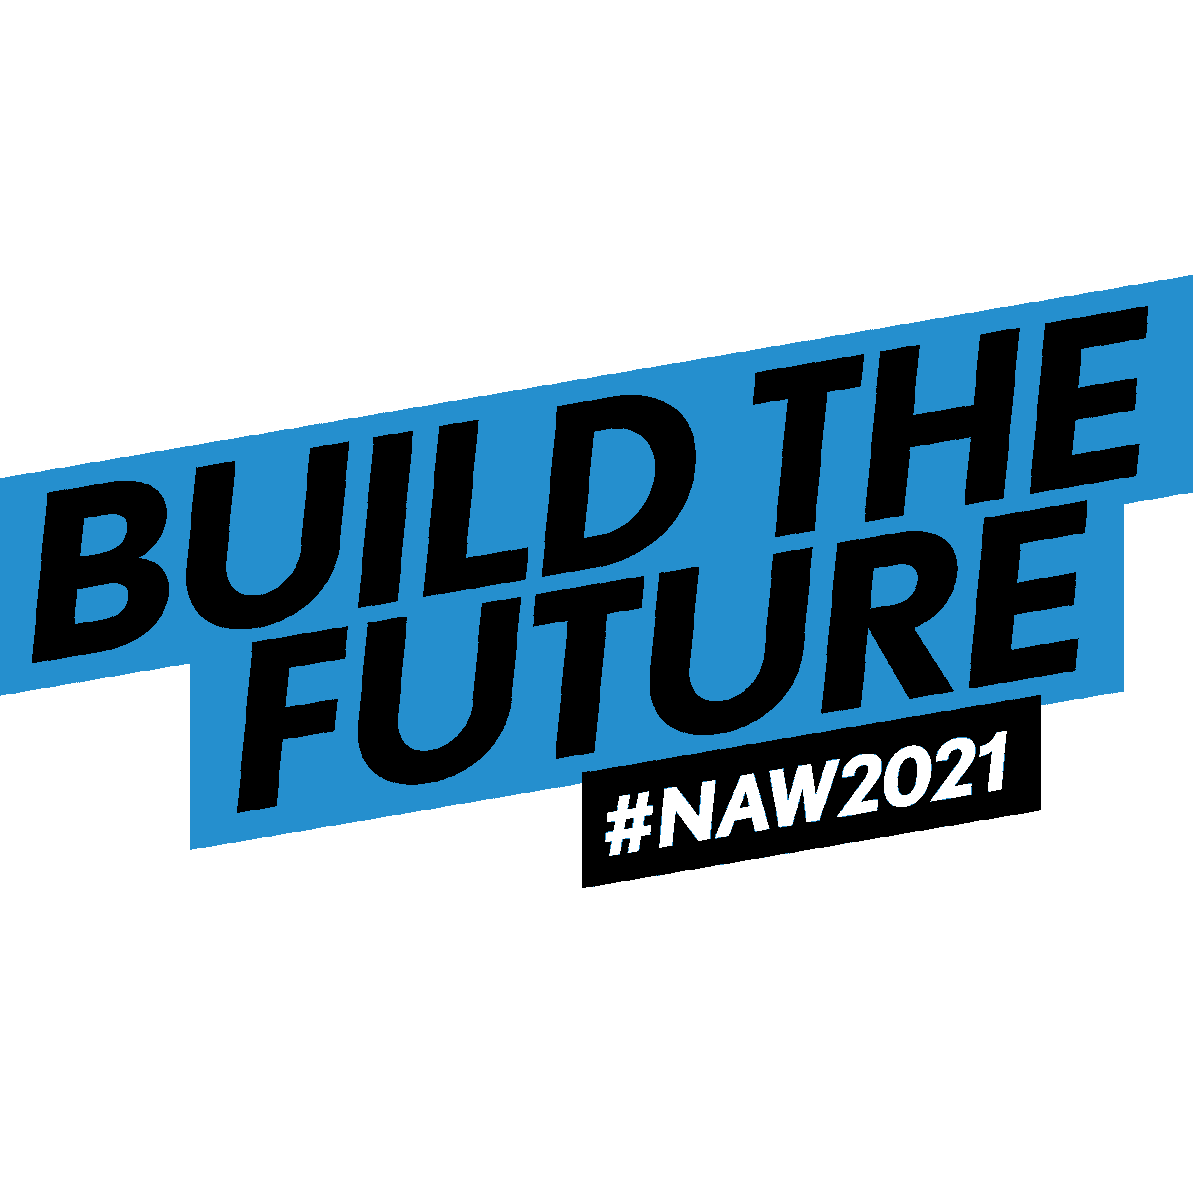 We’re proud to be supporting #NAW2021. We want to say a huge thank you to our apprentices who are learning remotely whilst pubs are closed. Their dedication is inspiring! Interested in an apprenticeship? Register for alerts on marstonscareers.co.uk #wearemarstons #wedreambig